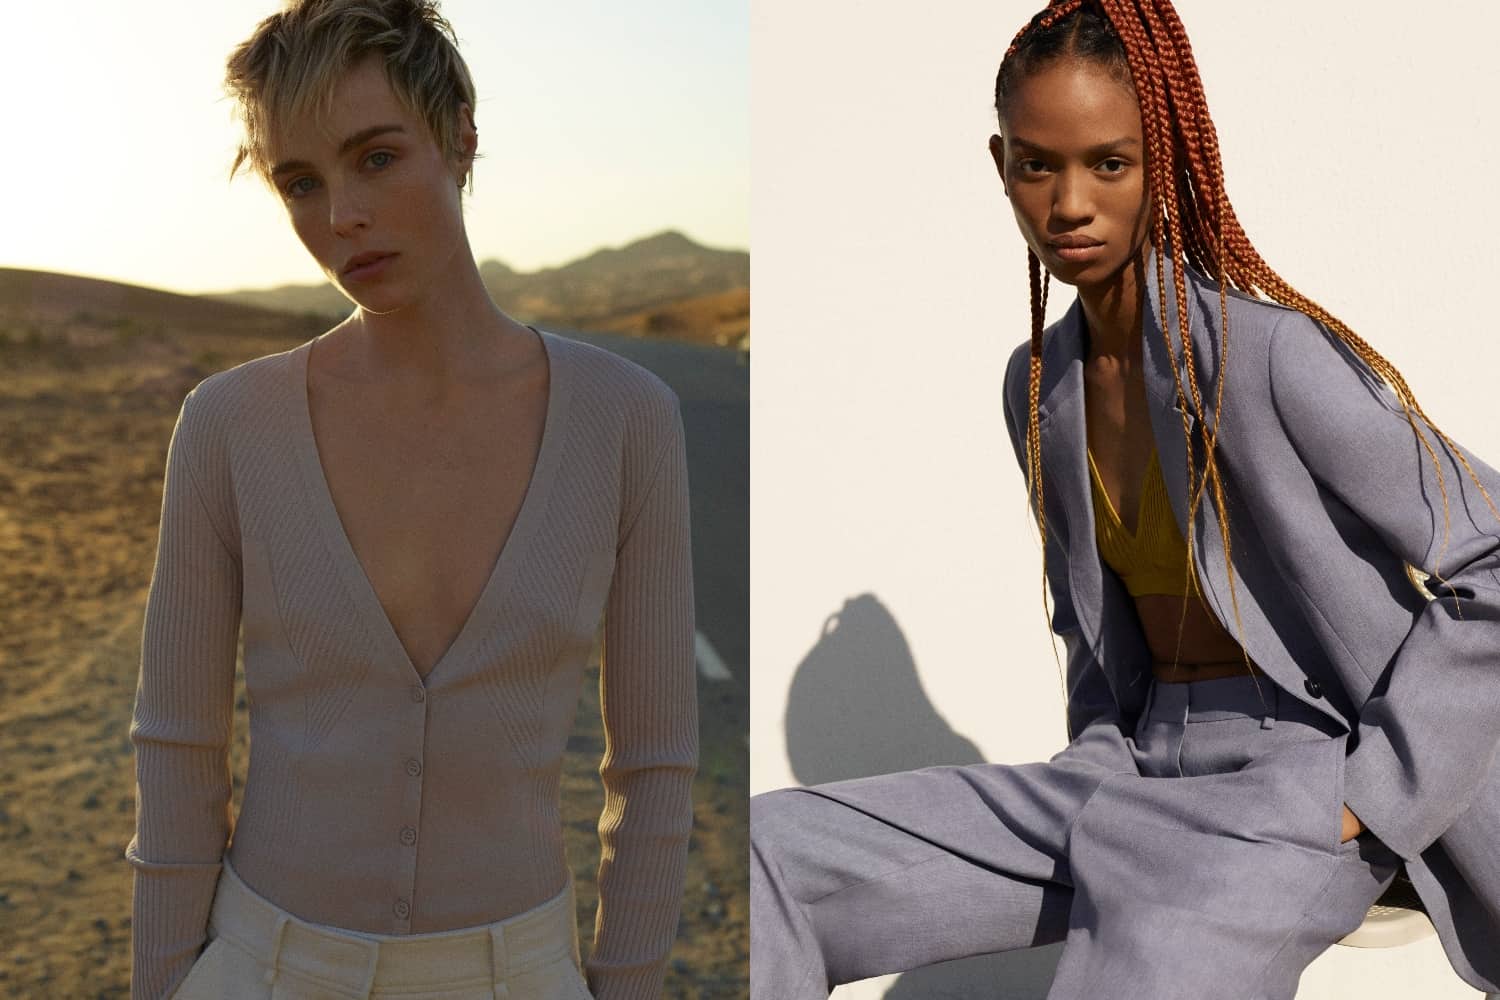 Adesuwa Aighewi And Edie Campbell Front The COS Spring '21 Campaign